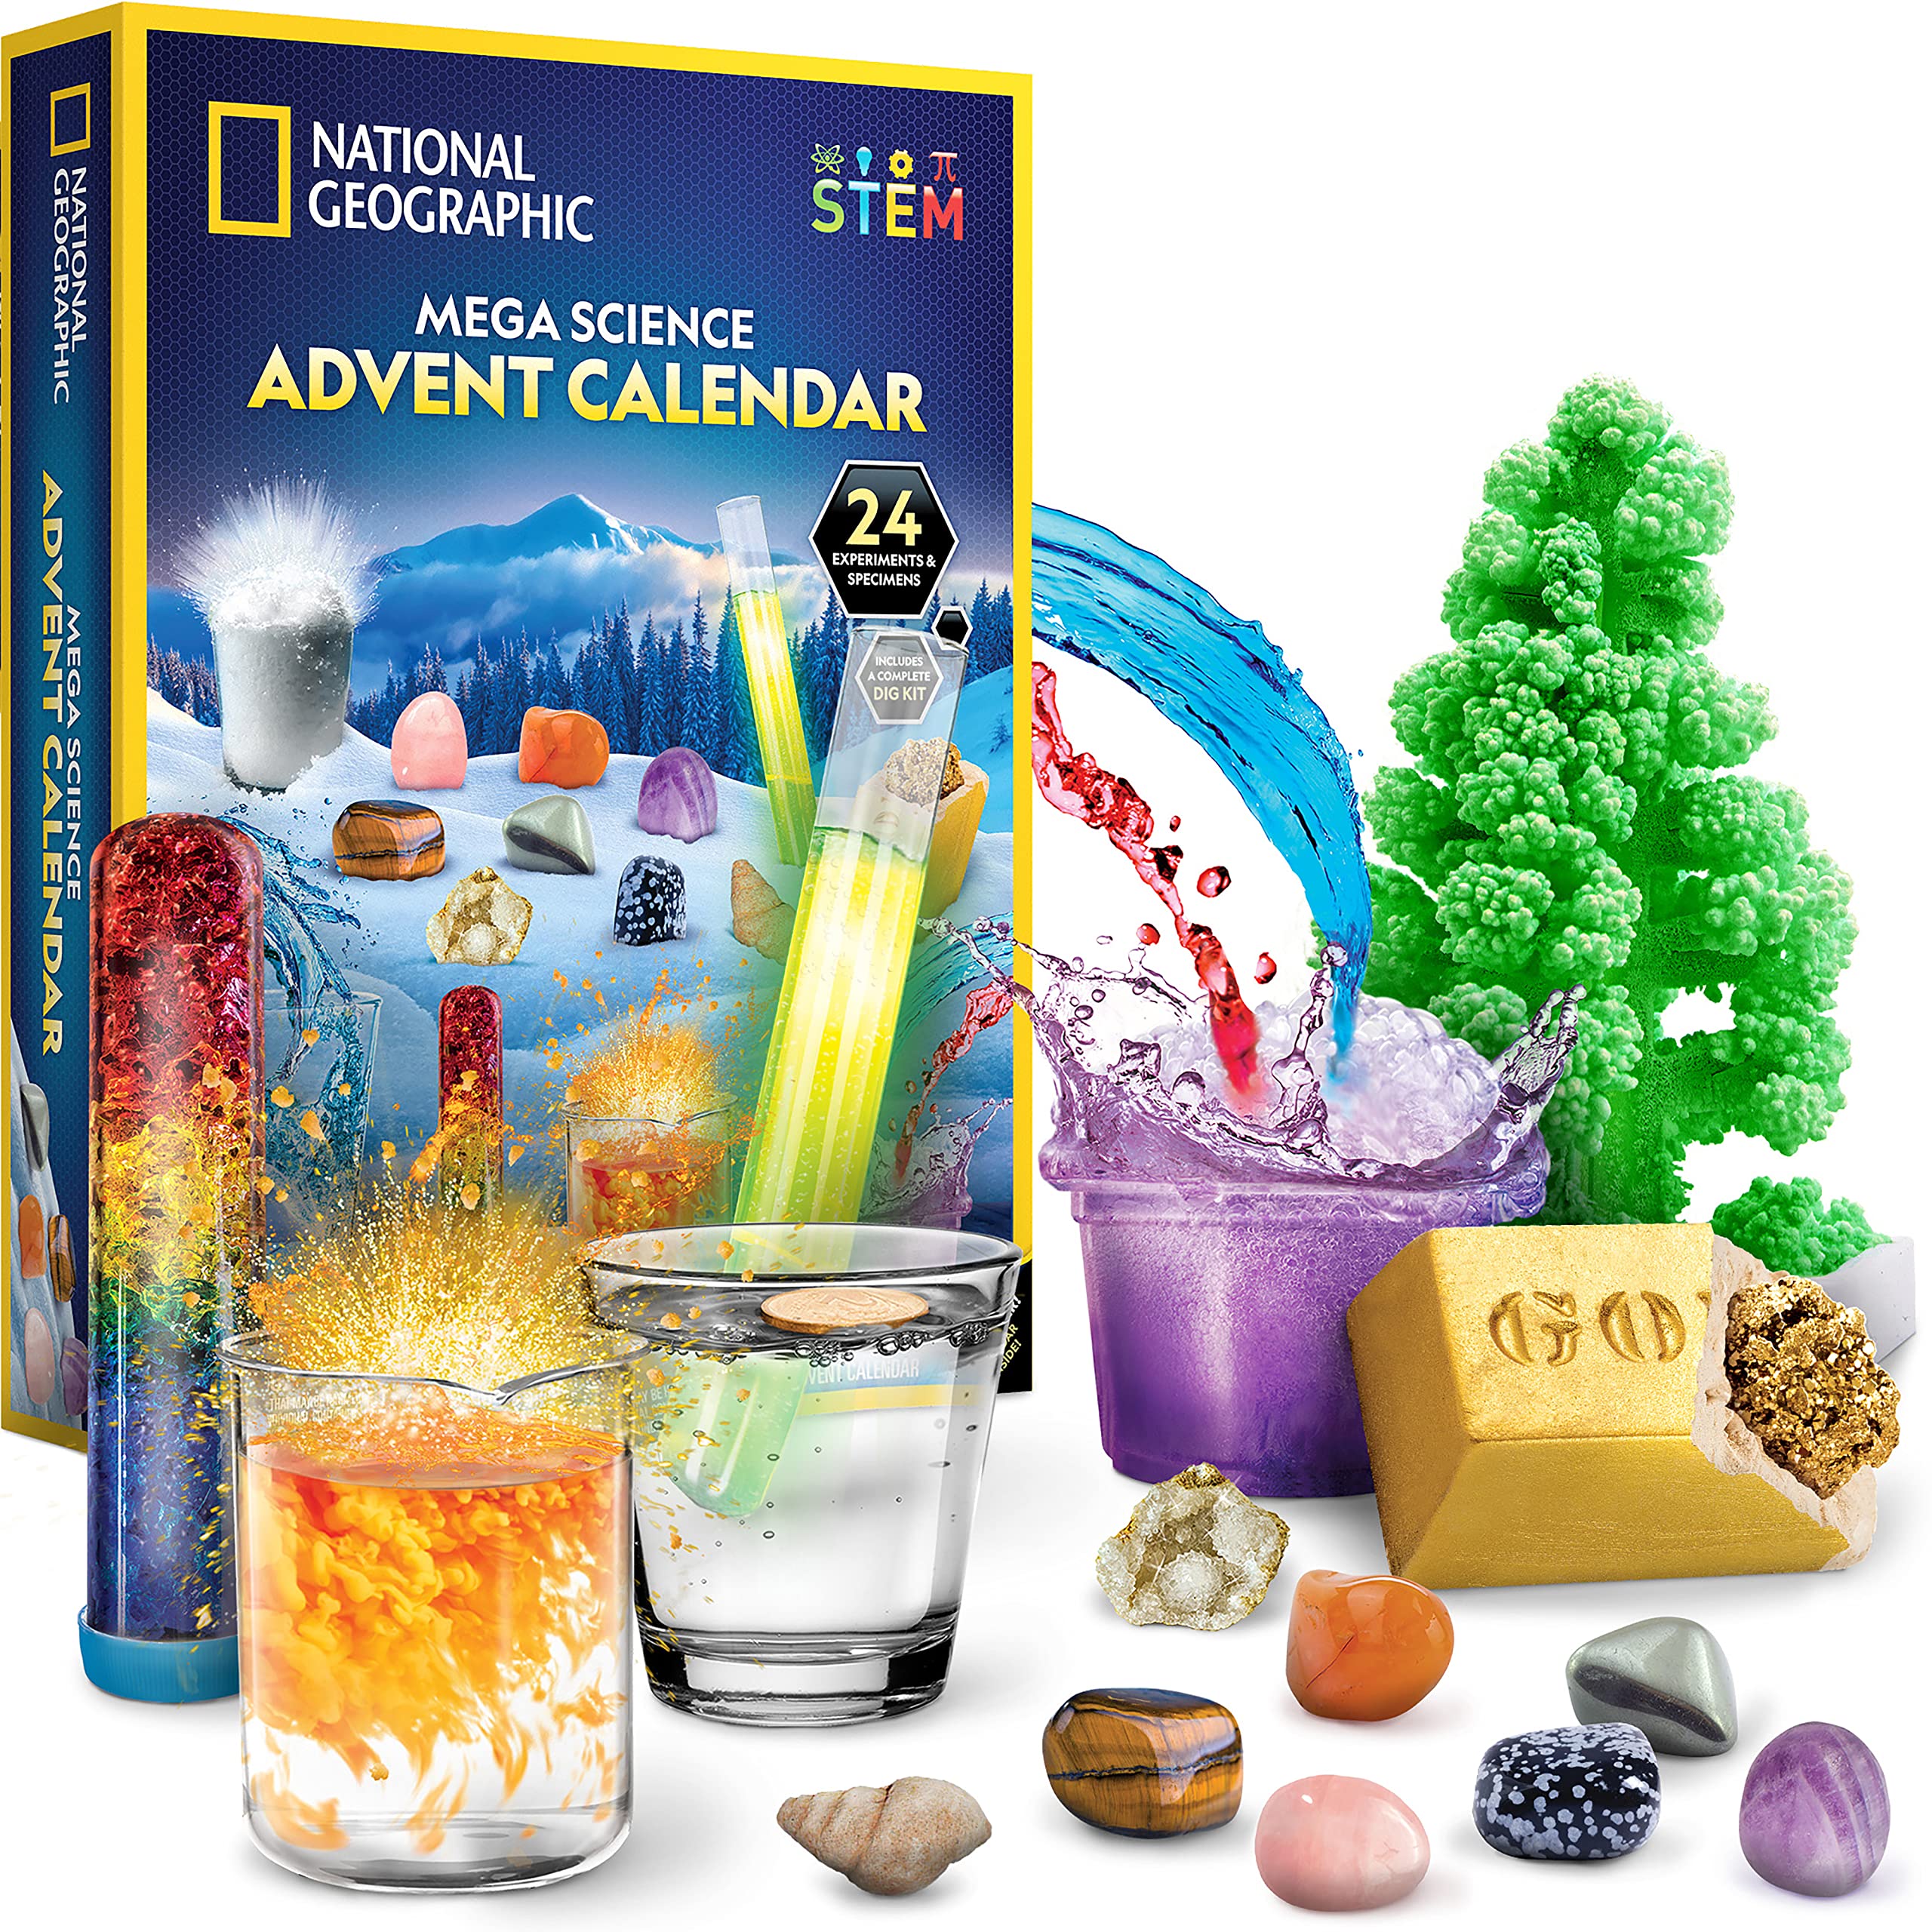 $25.49: National Geographic Mega Science Advent Calendar w/ Experiments, Fossils & Gemstones